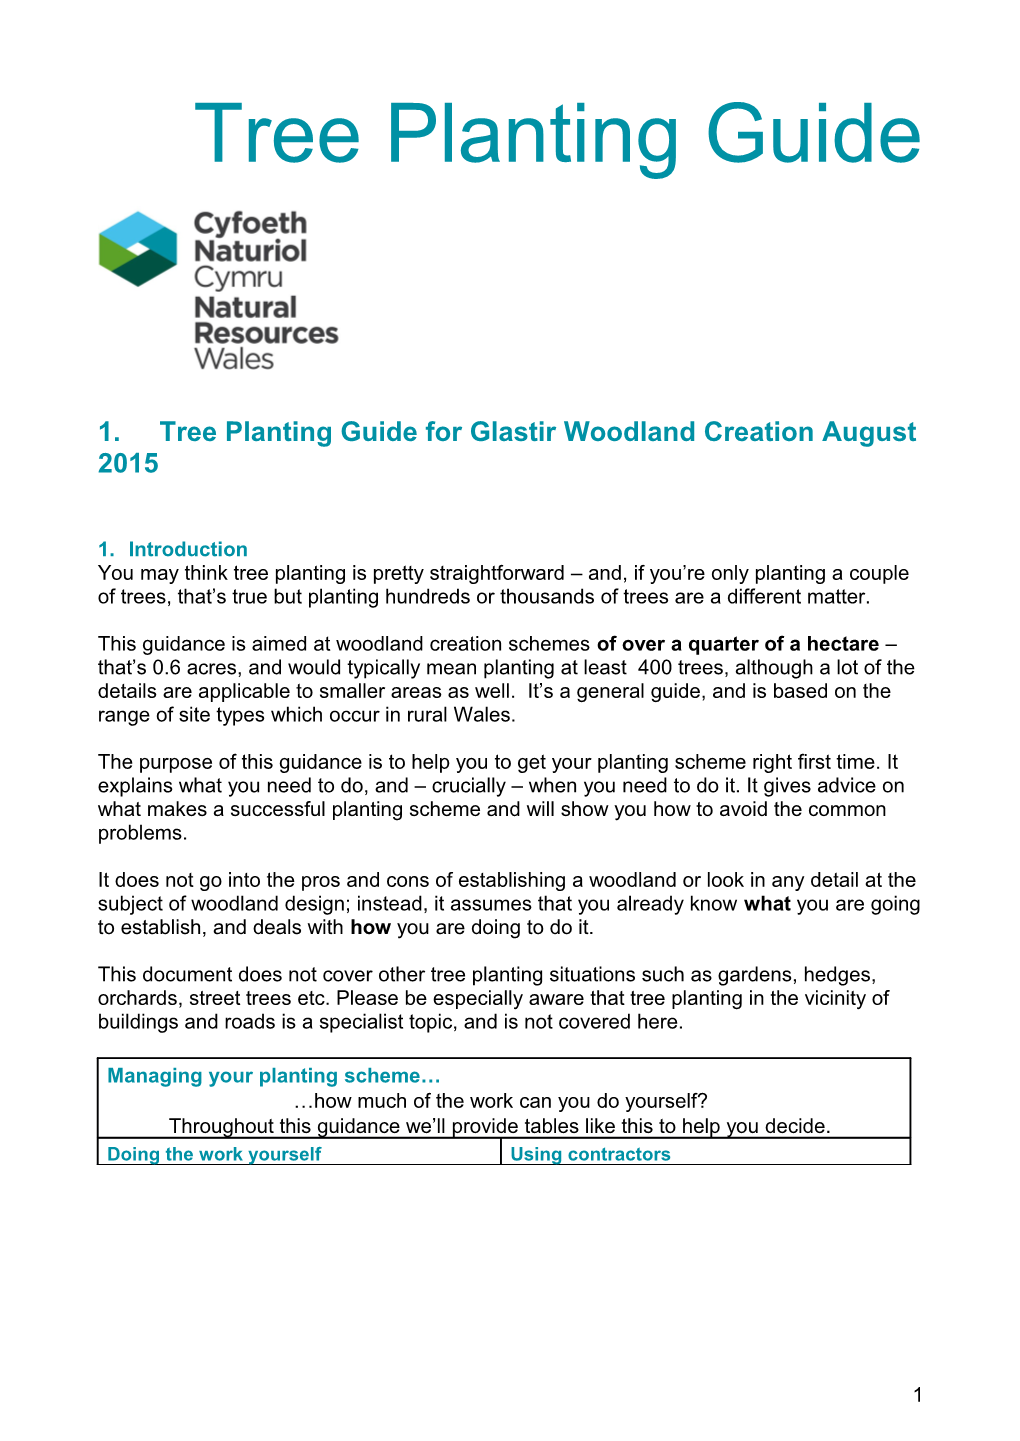 Tree Planting Guide for Glastir Woodland Creation August 2015